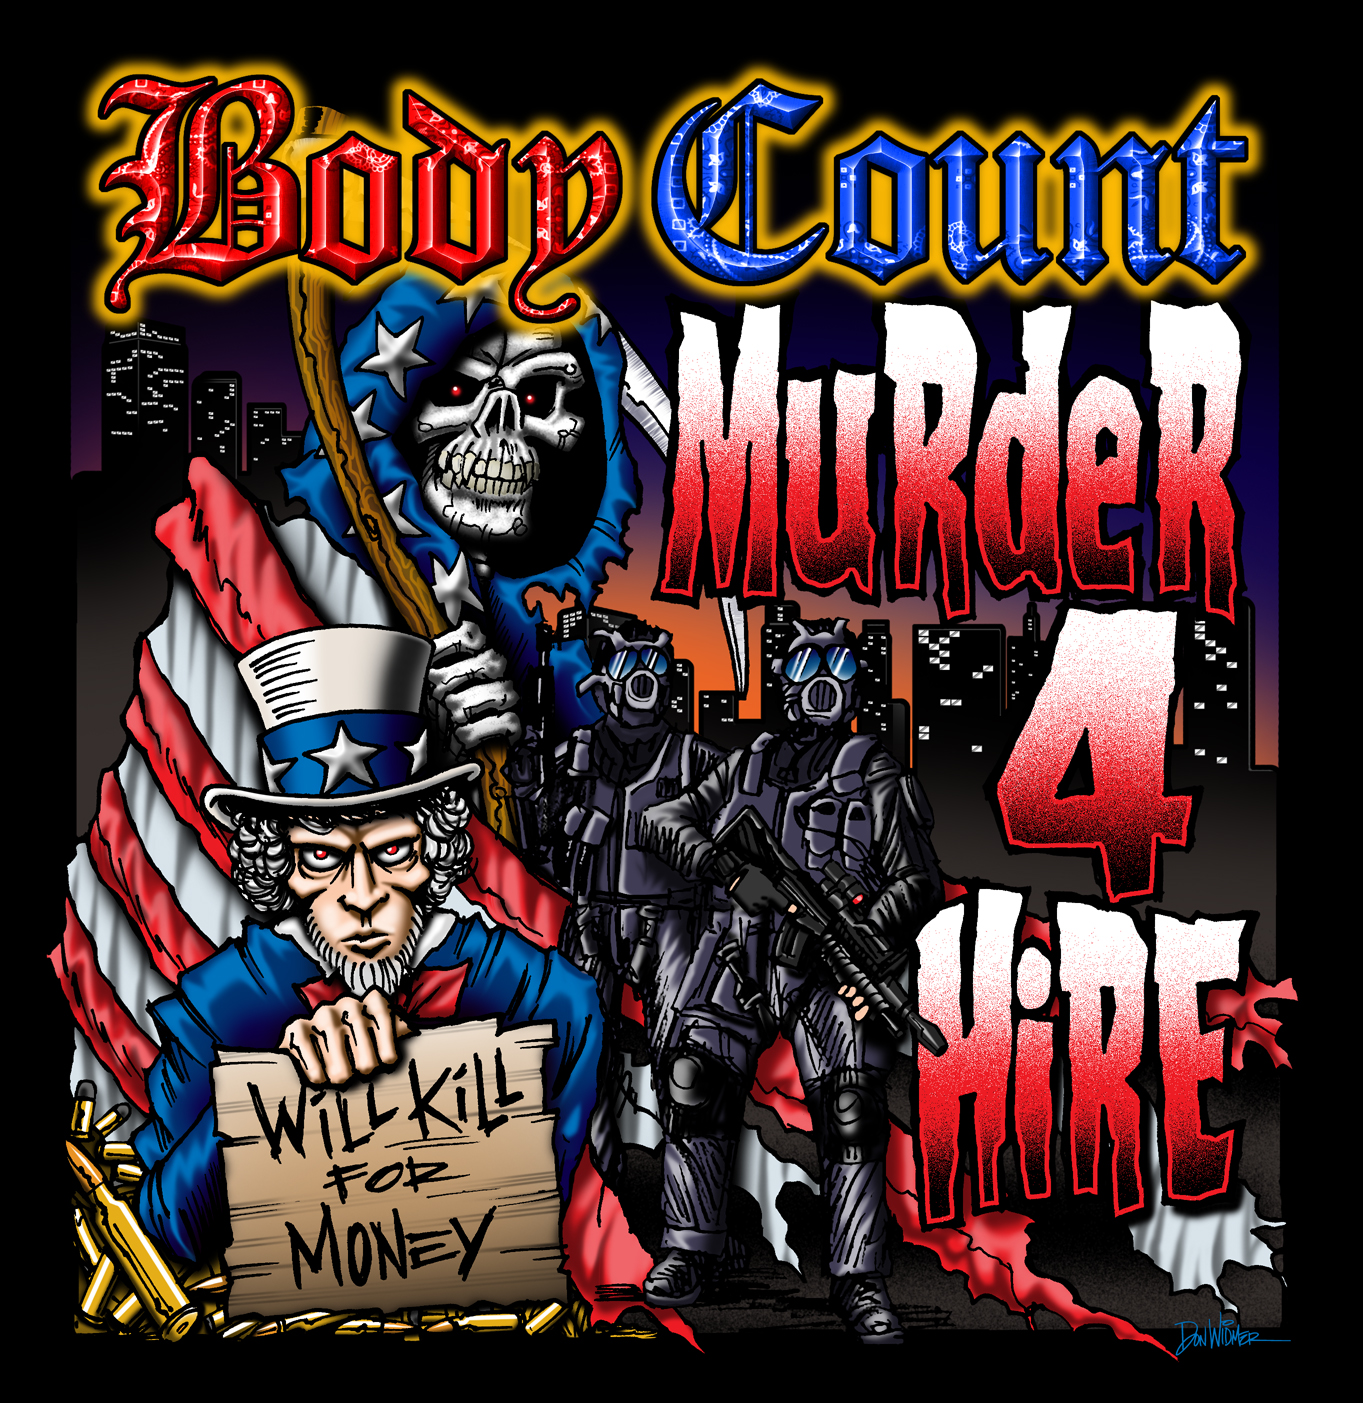 07 body count murder 4 hire